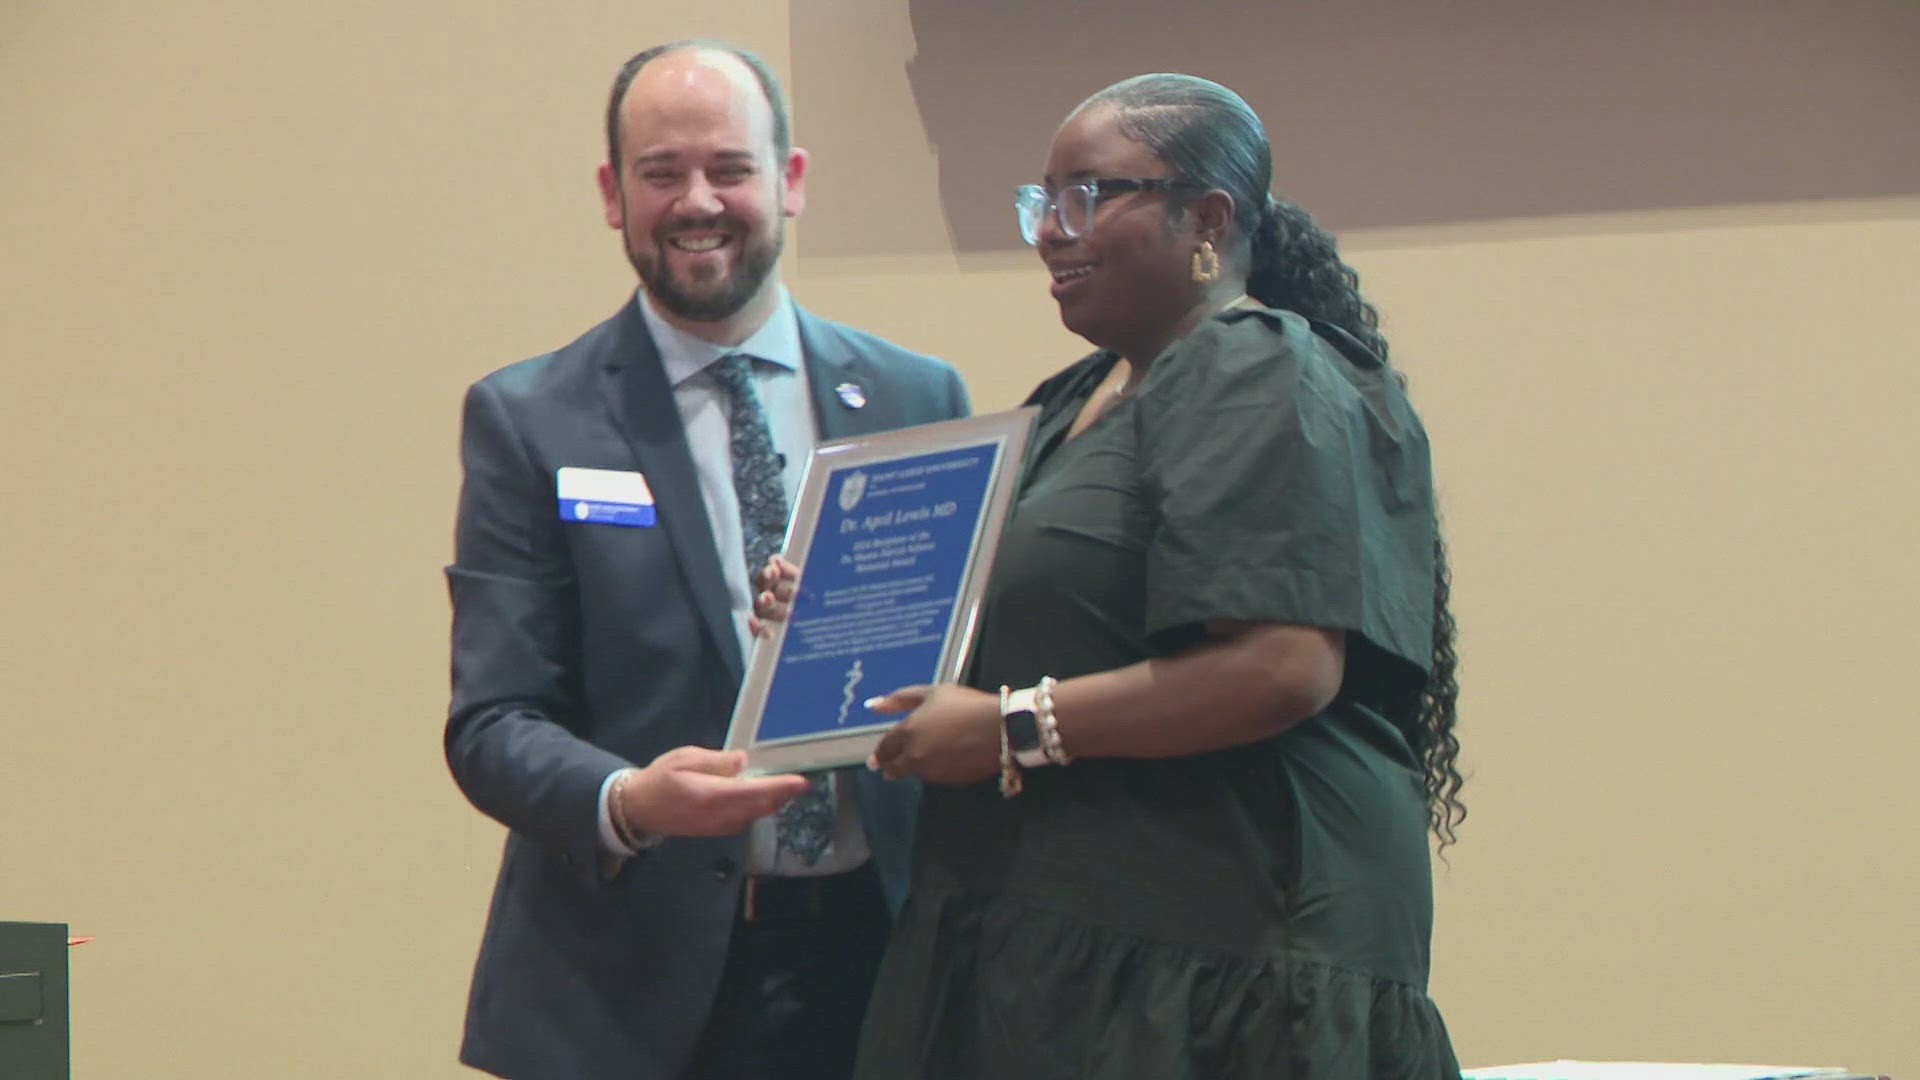 Thursday night, the Saint Louis University School of Medicine honored one of their soon-to-be graduates.